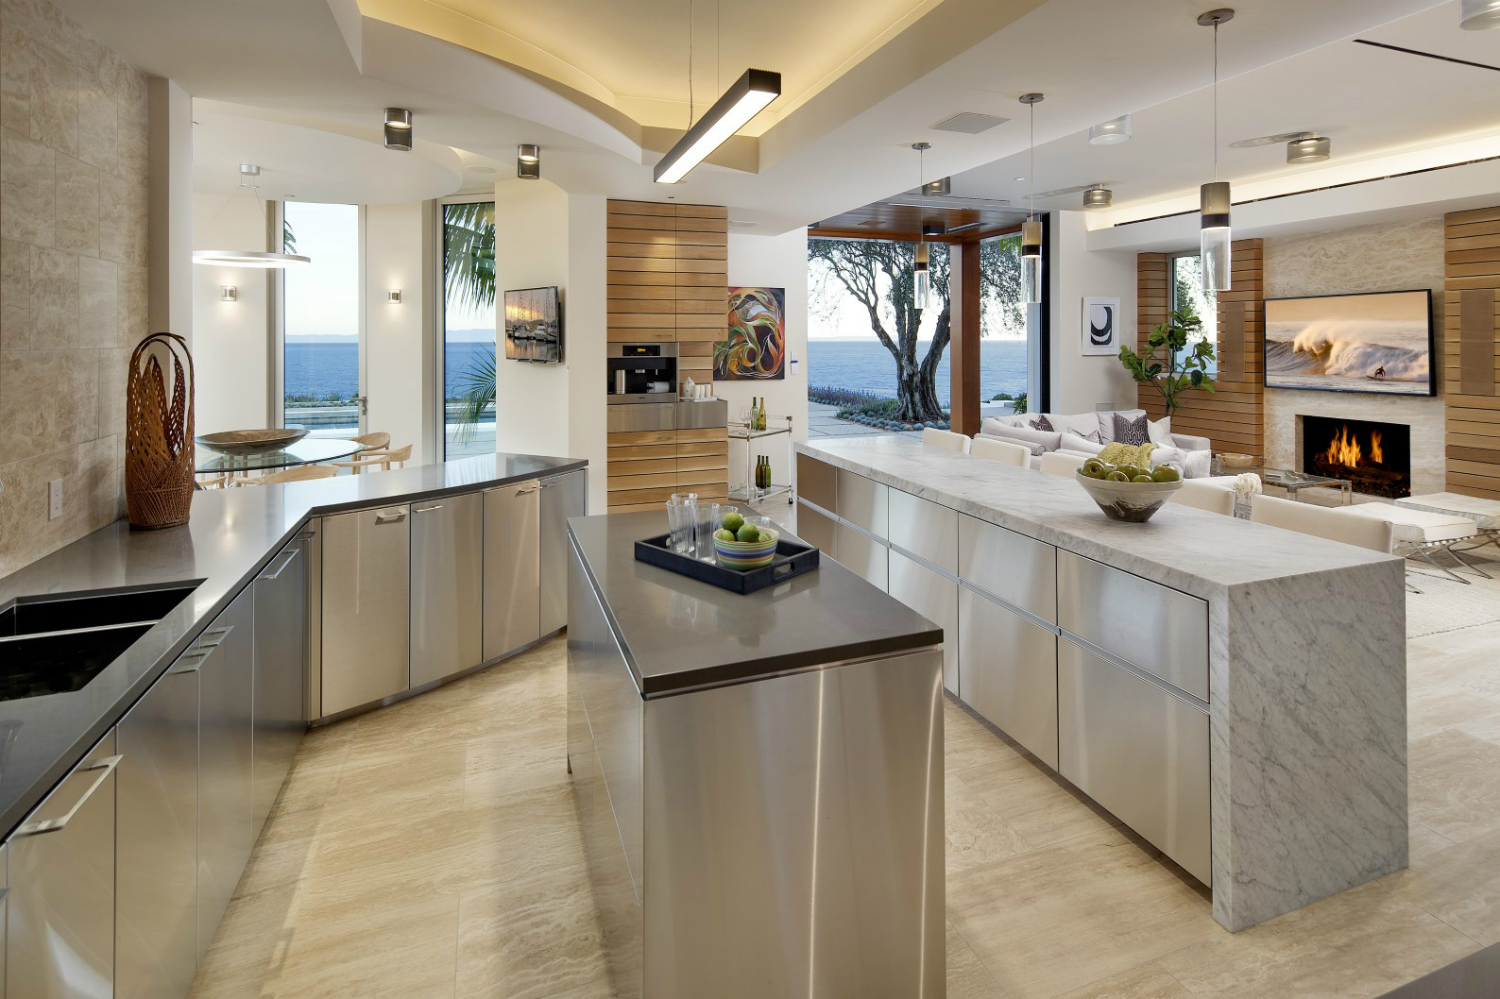 former apple exec selling his smart home for 35 million kitchen